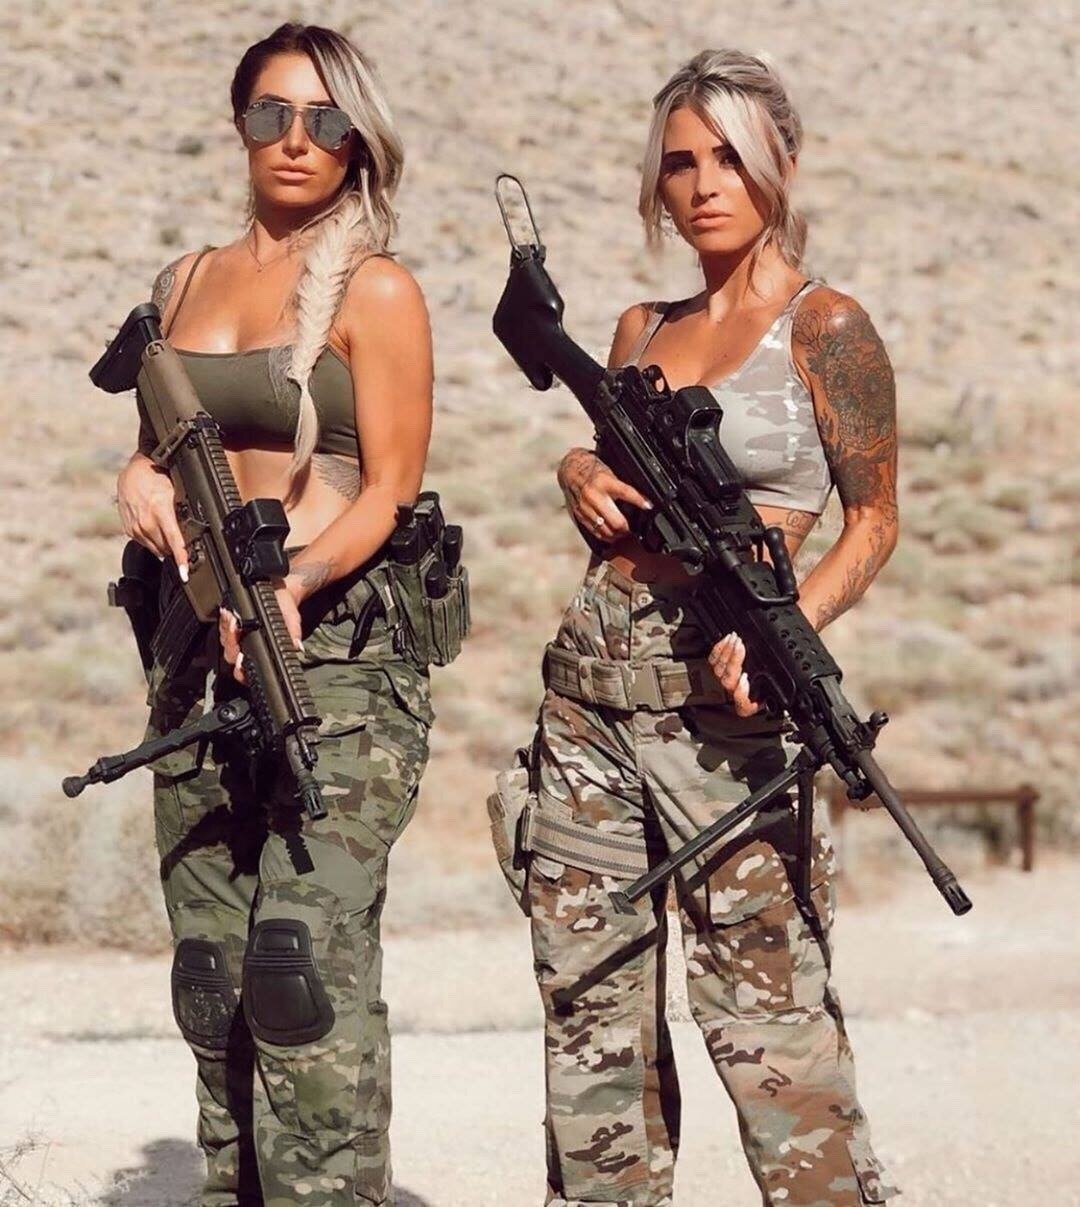 Girls hot military Sexy snaps